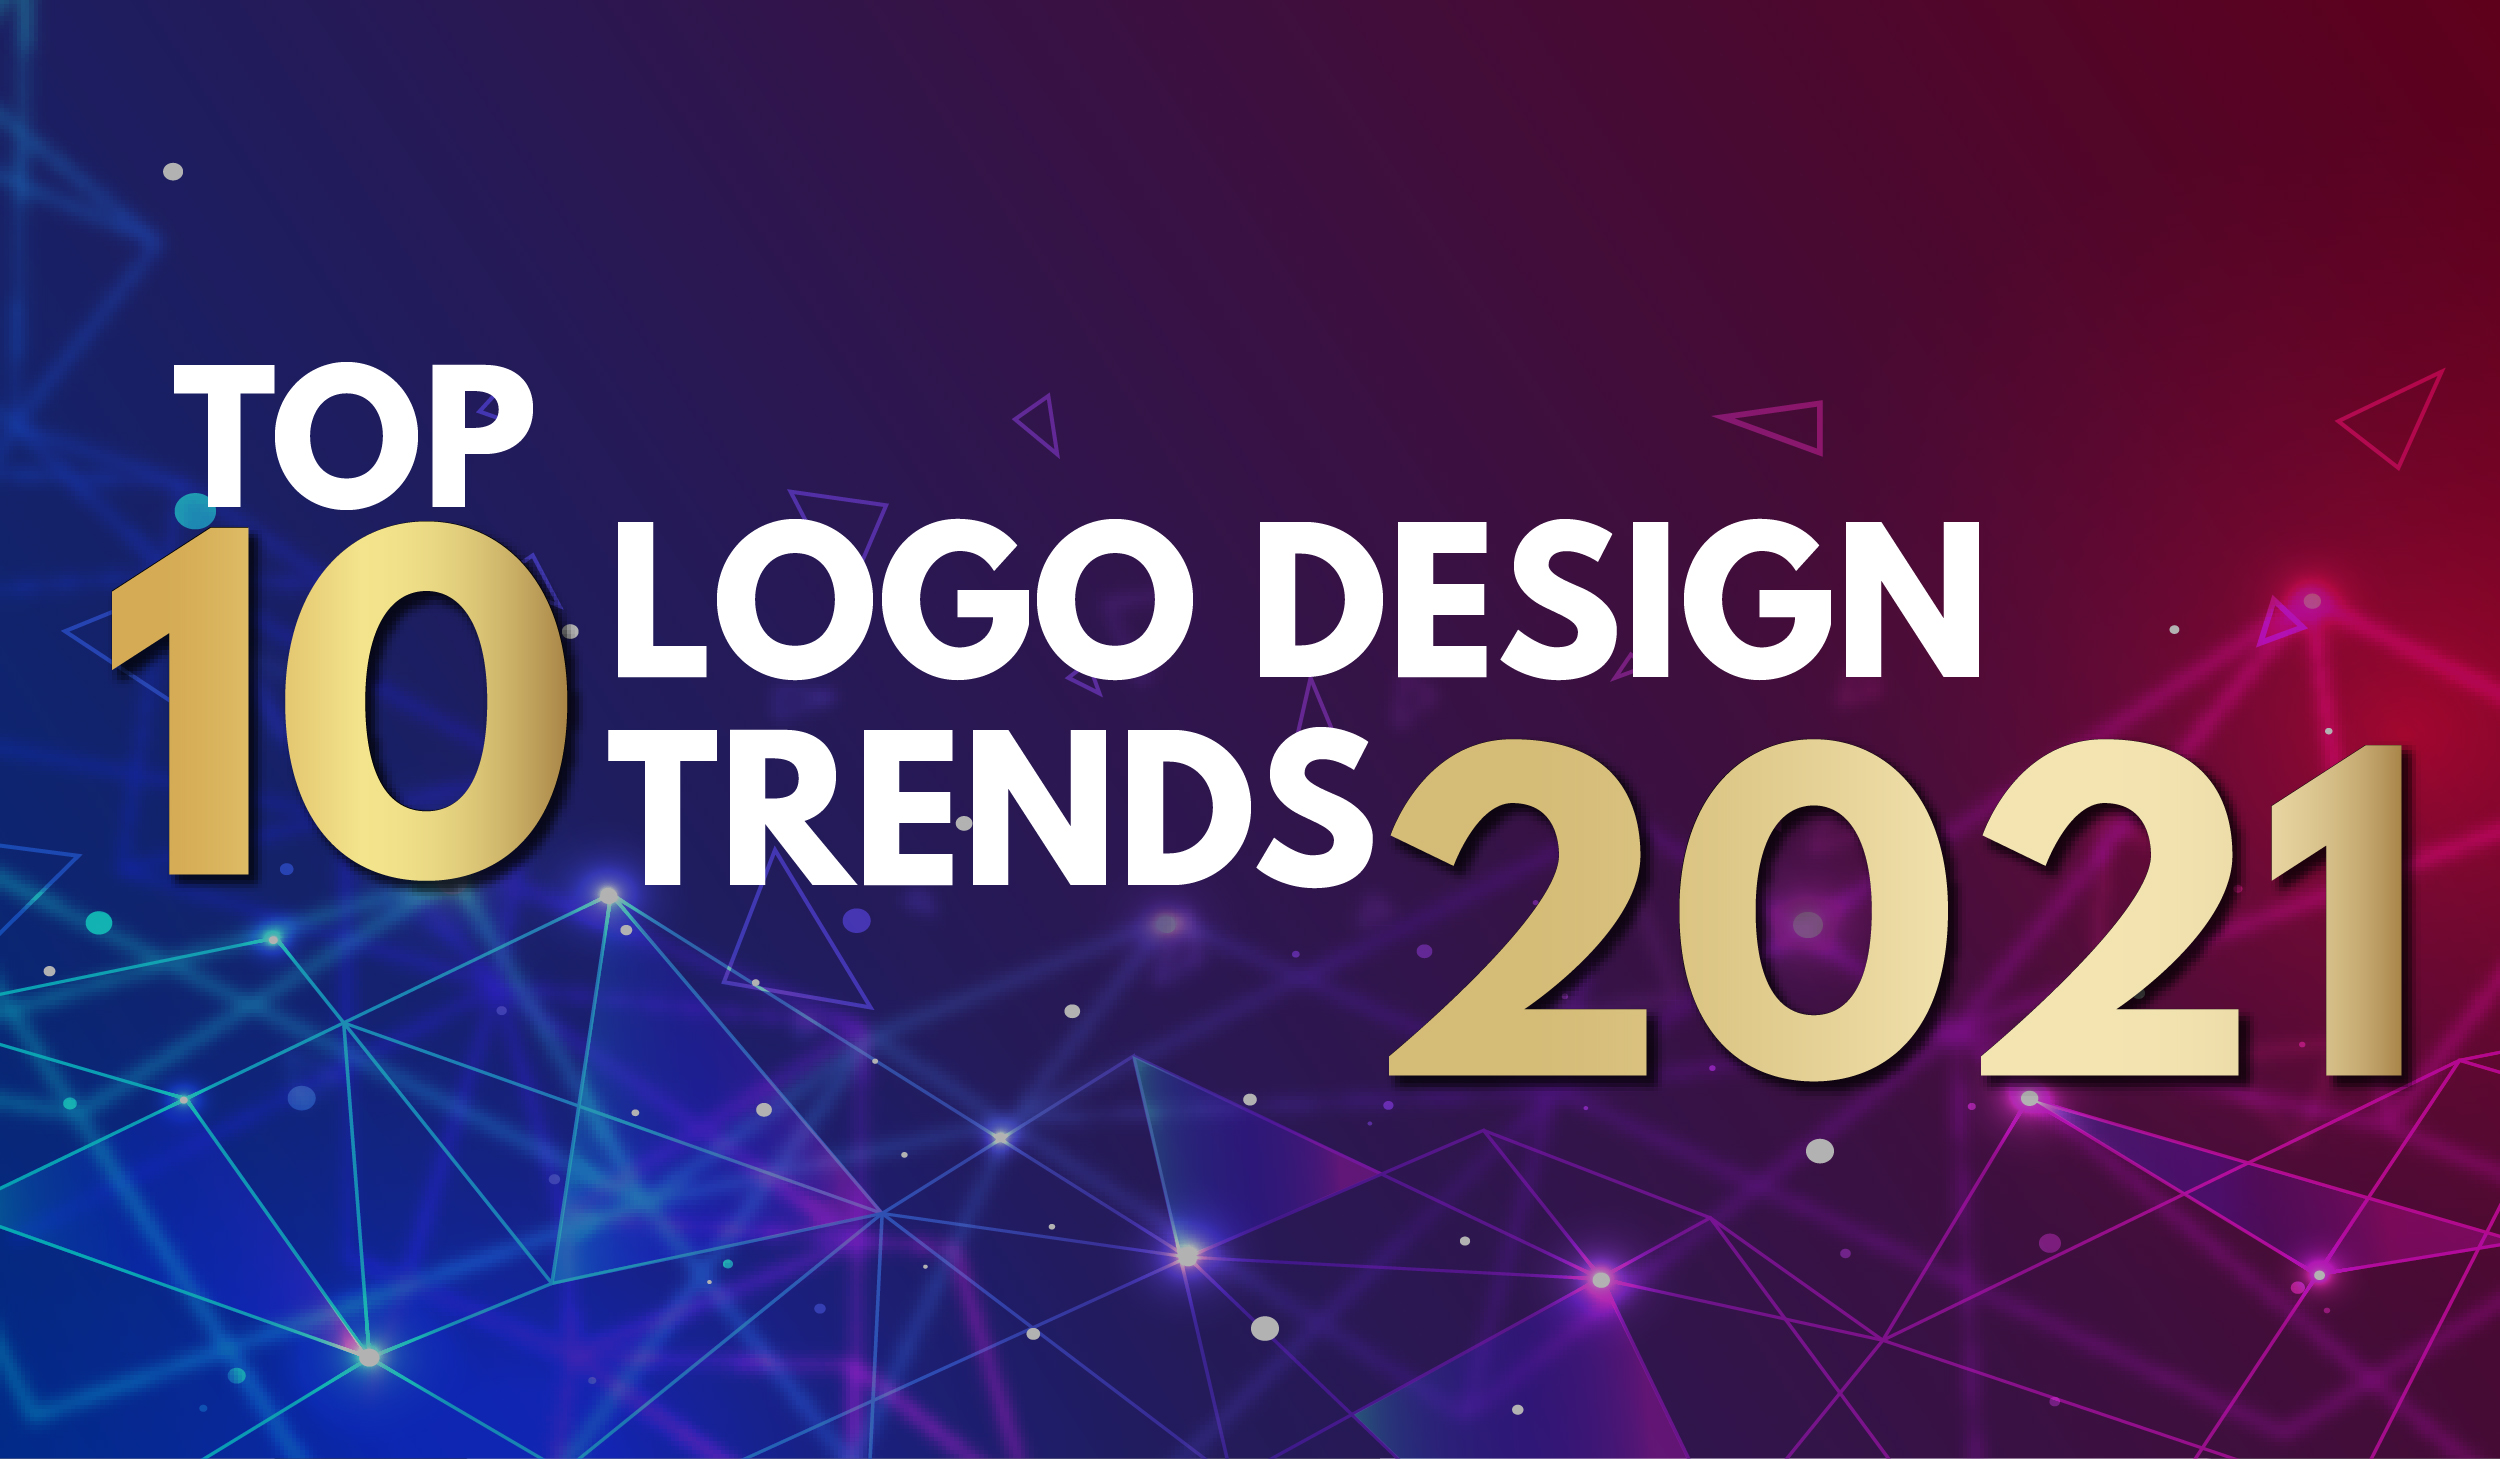 2021 Logo Design Trends Some Of The Logo Design Trends In 2021 Are